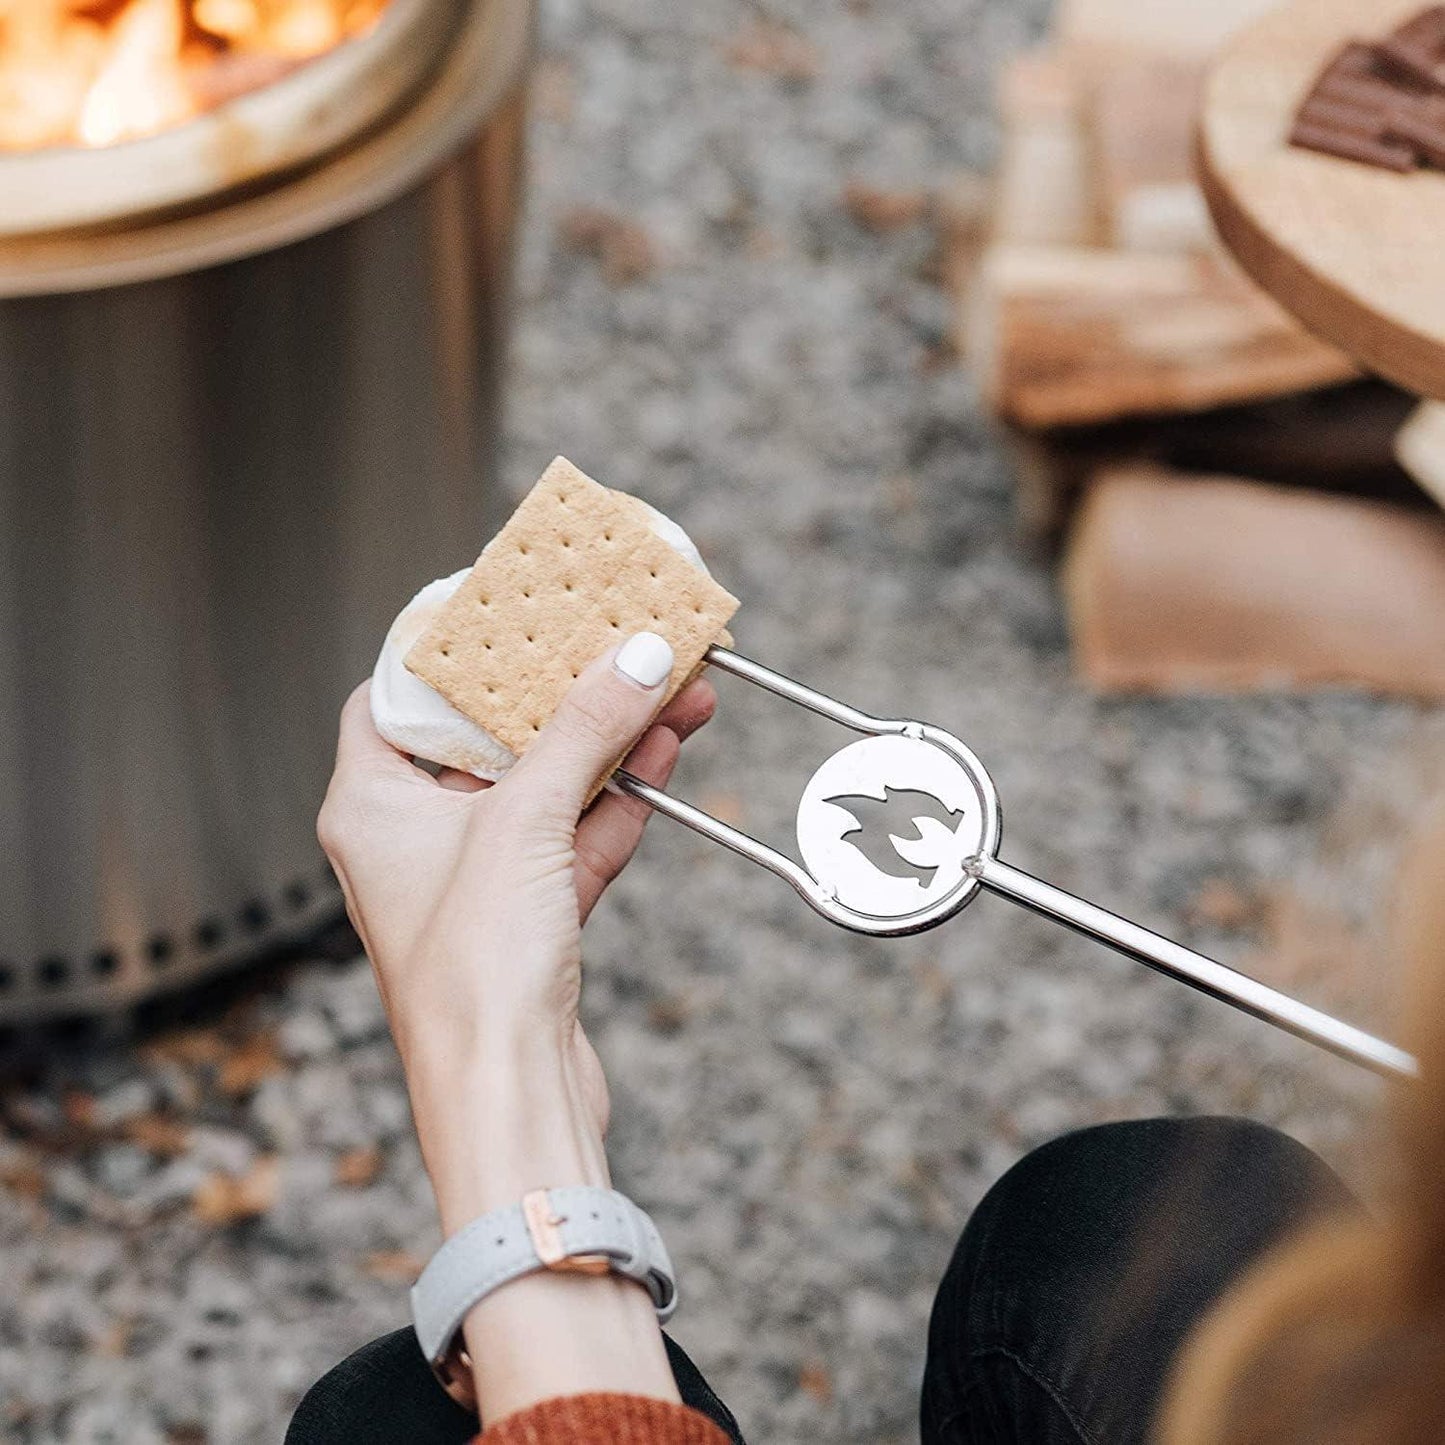 Solo Stove Roasting Sticks and Fire Pit Poker & Tongs | Great for Roasting Marshmallows, Smores and Hot Dogs | Firewood Accessories for Outdoor Fire Pits